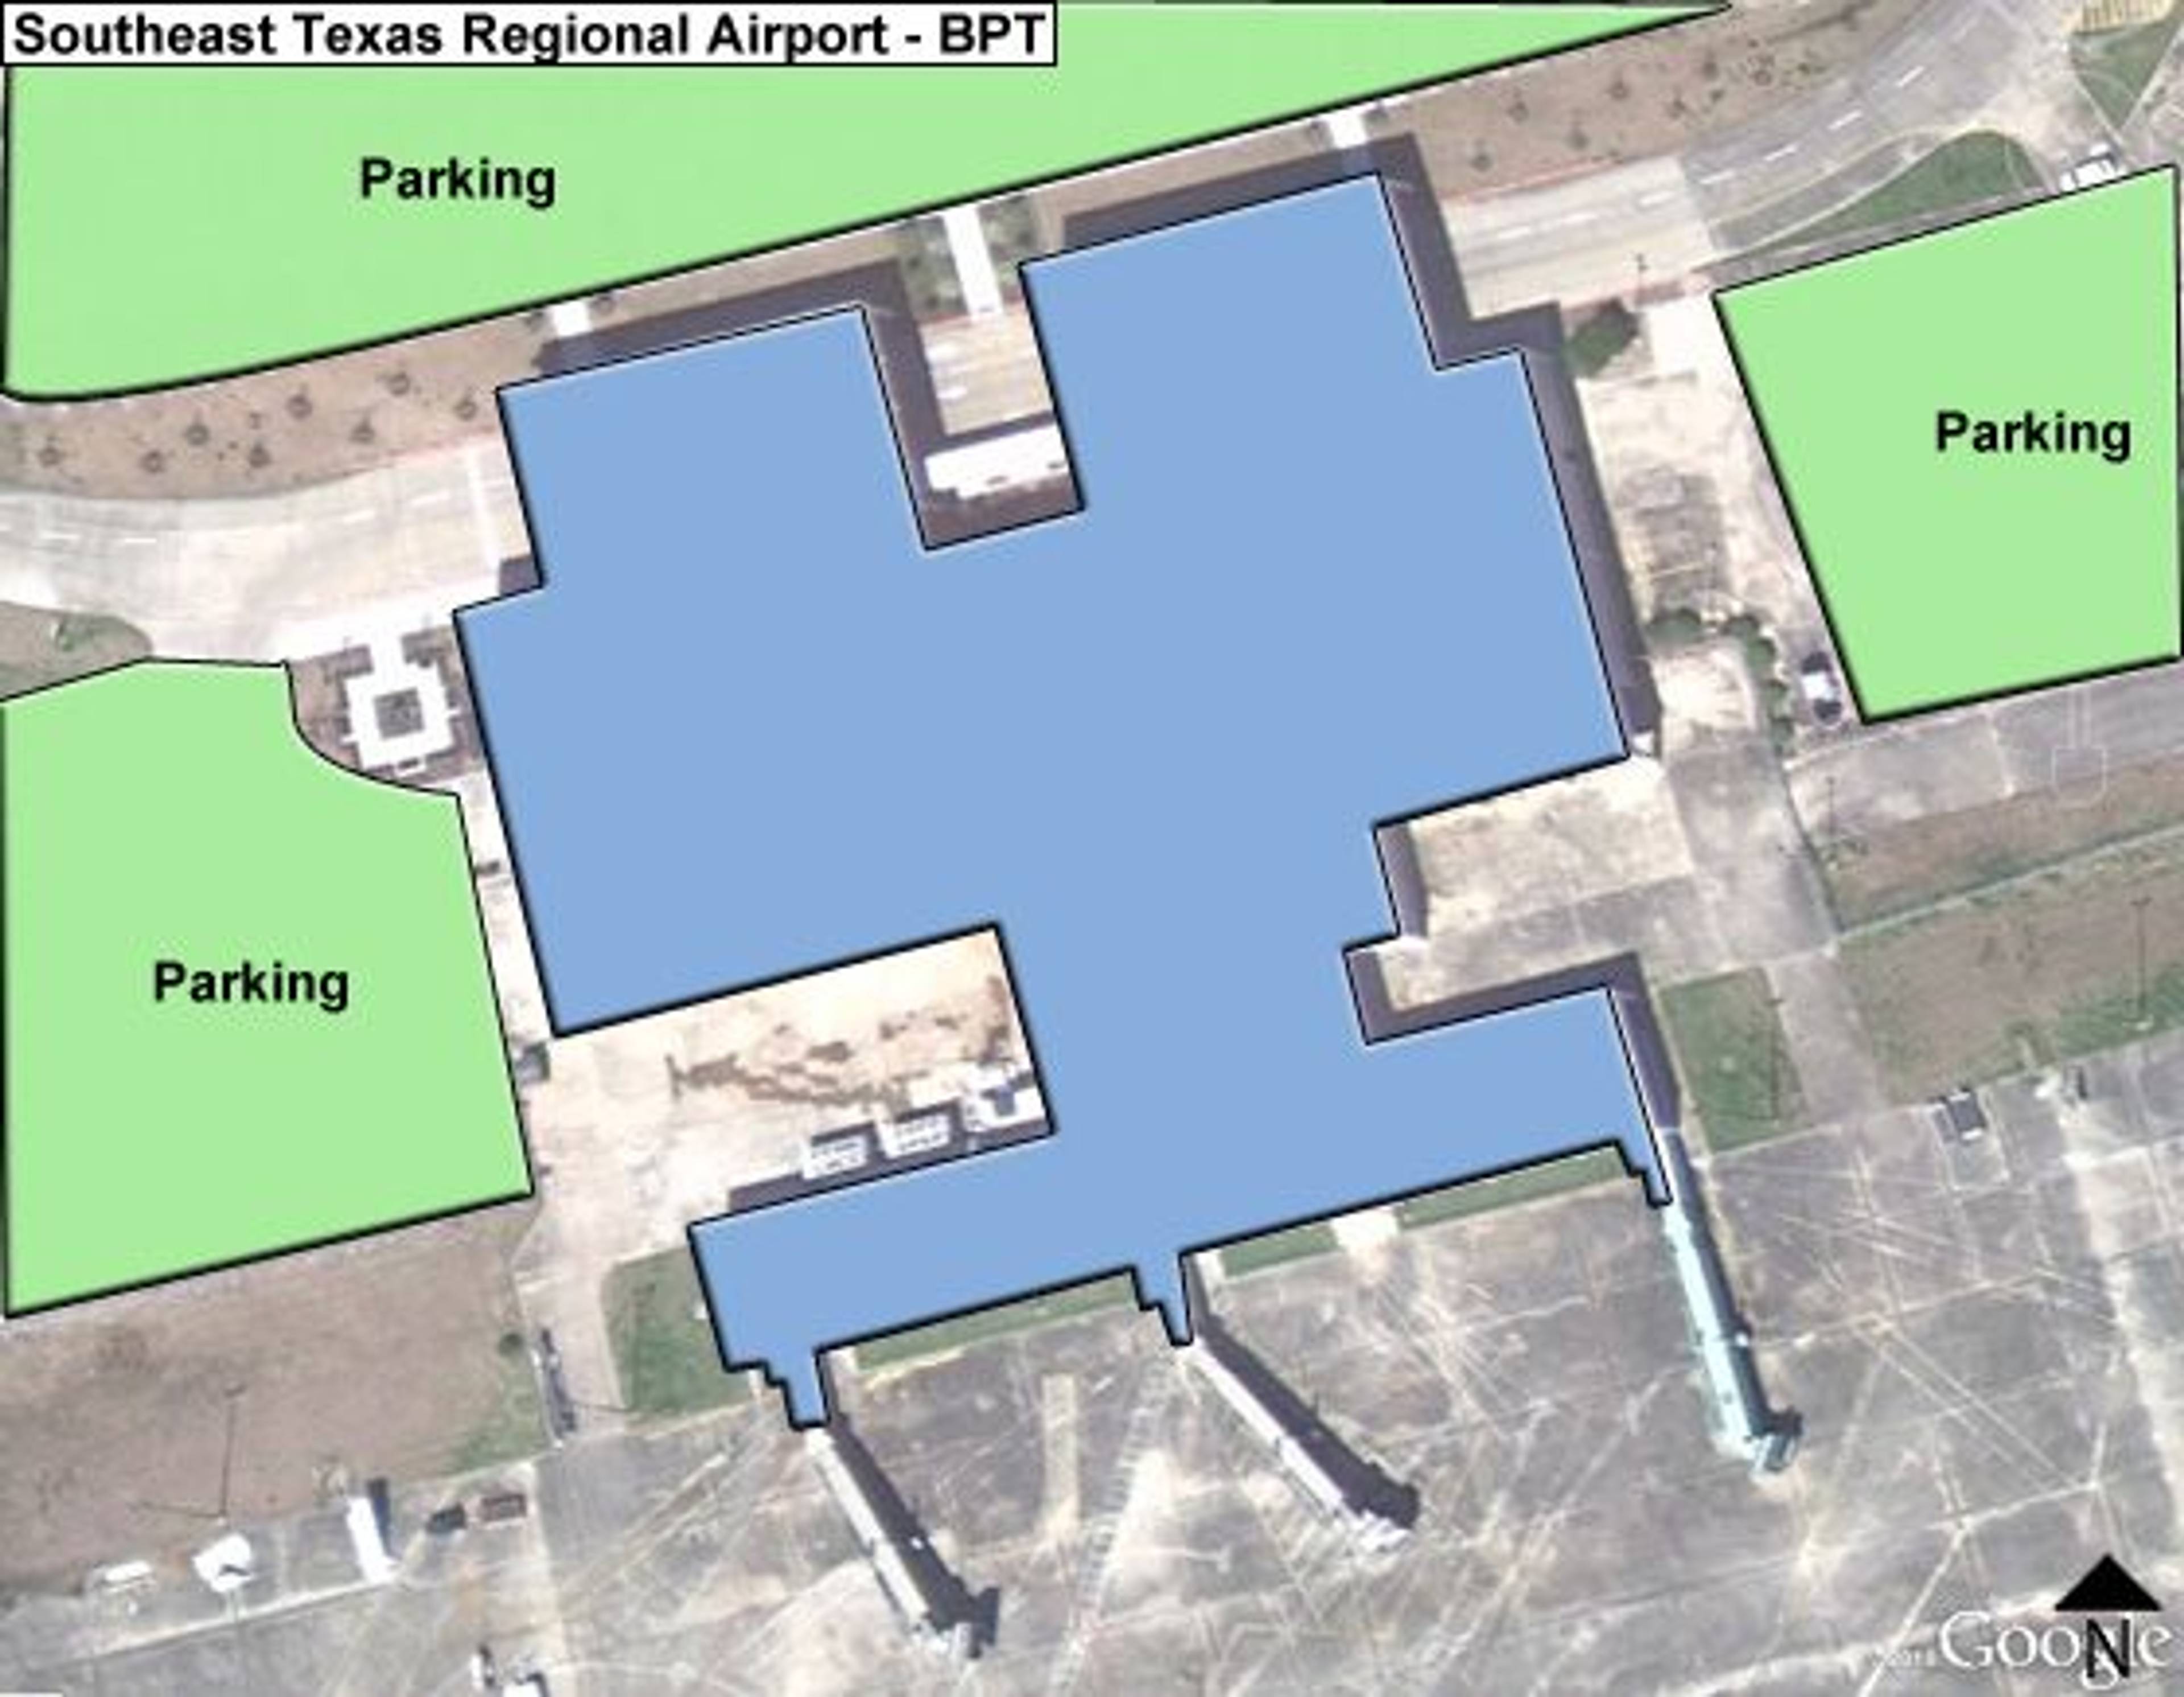 Nederland Airport Overview Map